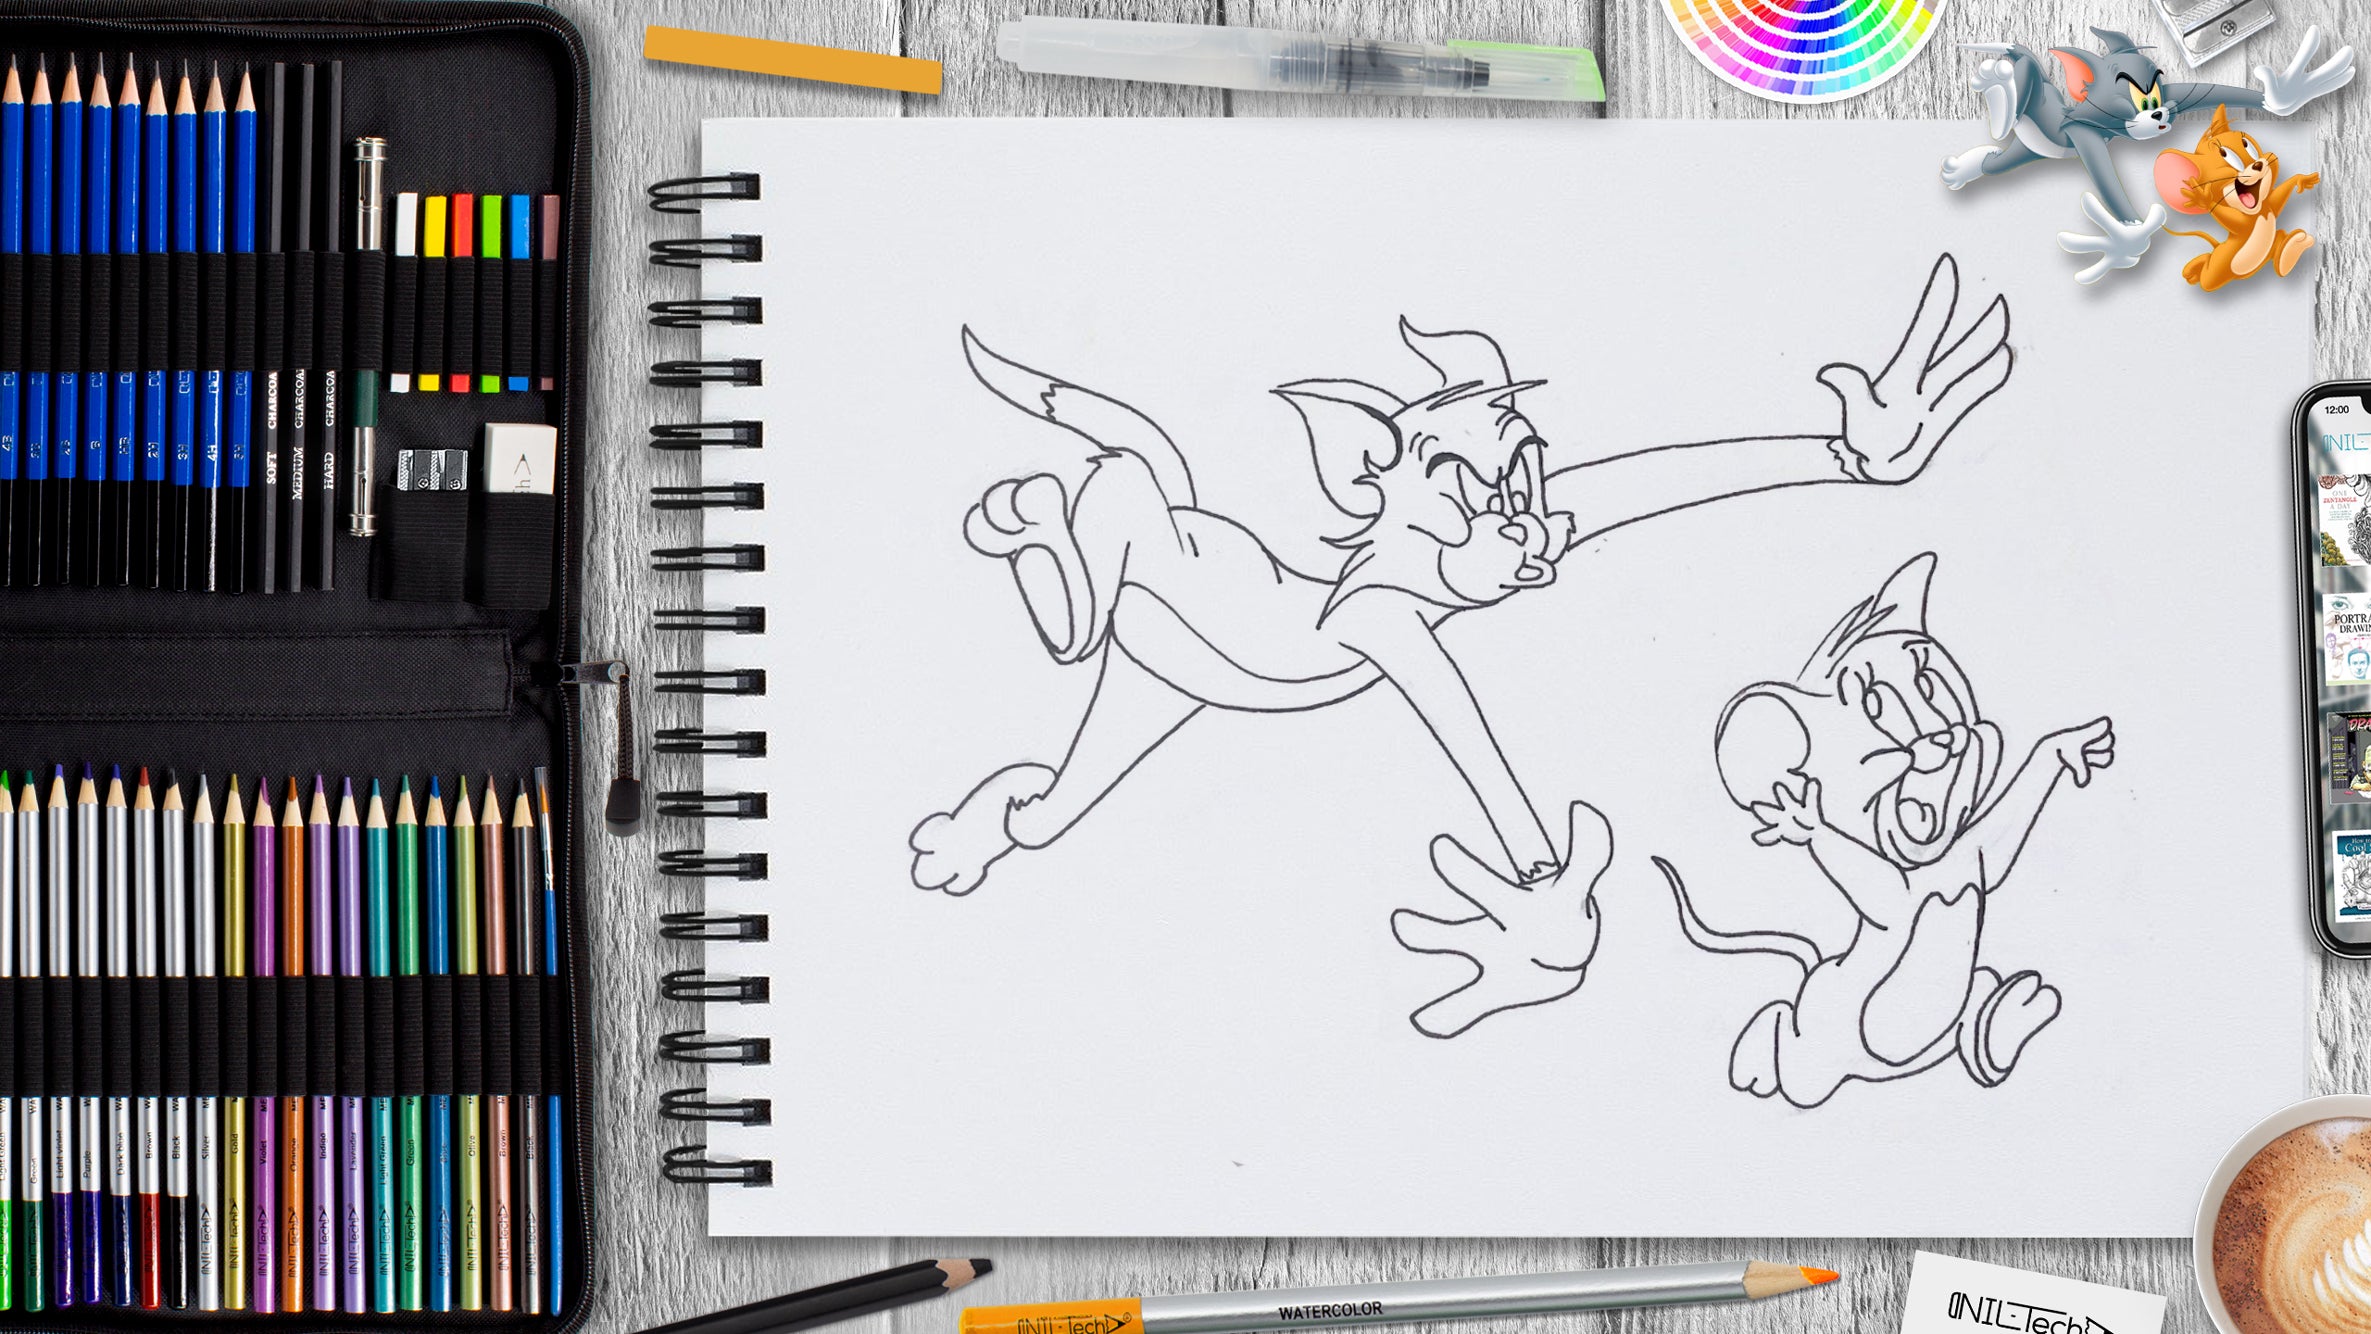 Tom and Jerry Images | Tom and jerry drawing, Tom and jerry, Jerry images